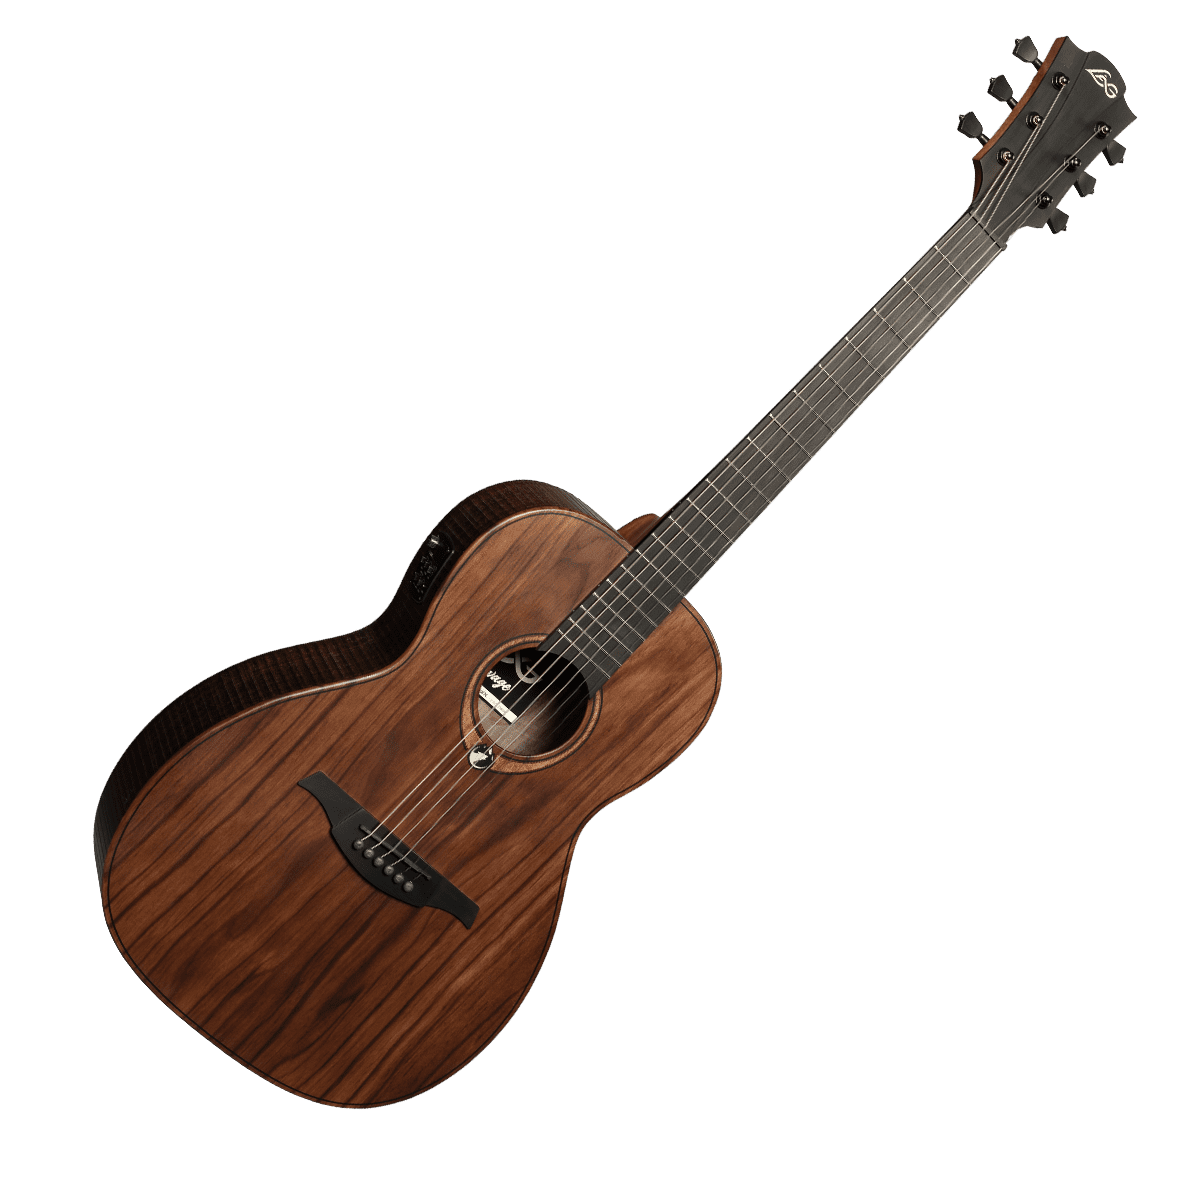 LAG Sauvage Parlor Acoustic-Electric, Electro Acoustic Guitar for sale at Richards Guitars.